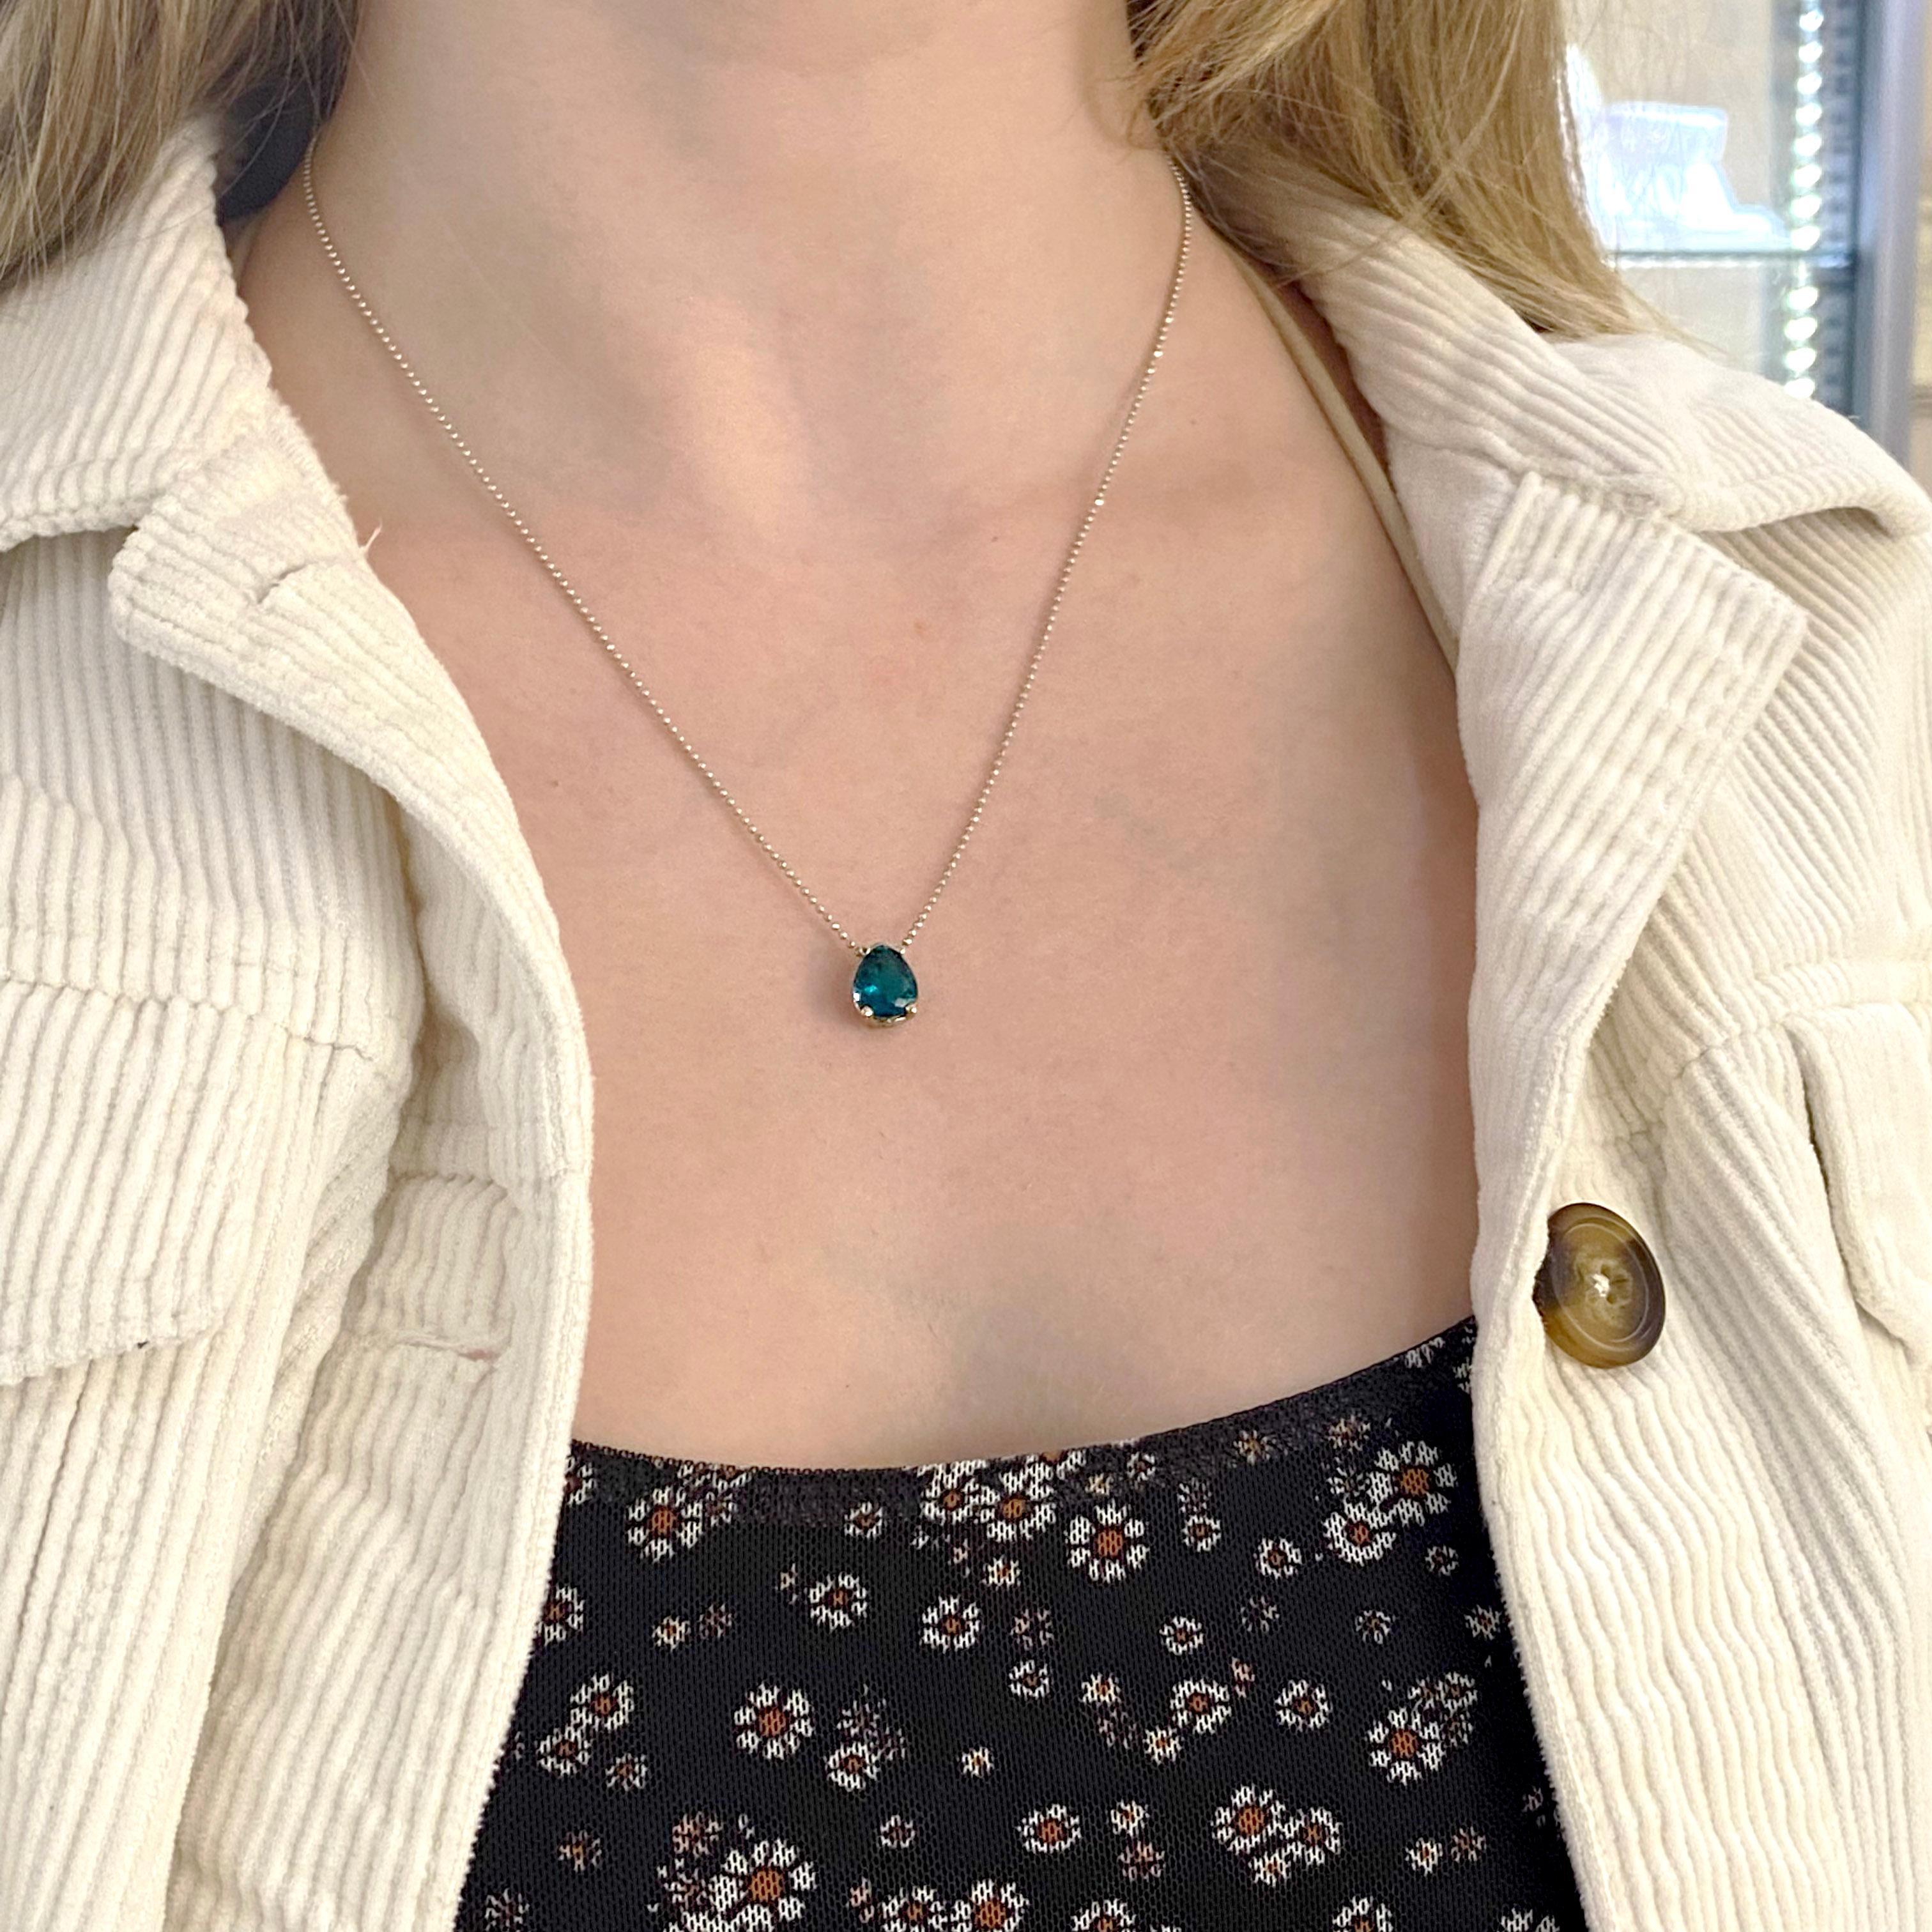 This teal colored apatite pendant and necklace is a spectacular gemstones with a truly unique color.  Many people have not heard of the apatite gem but its intensity of blue with a slight green color is highly desirable. This is a way to own a